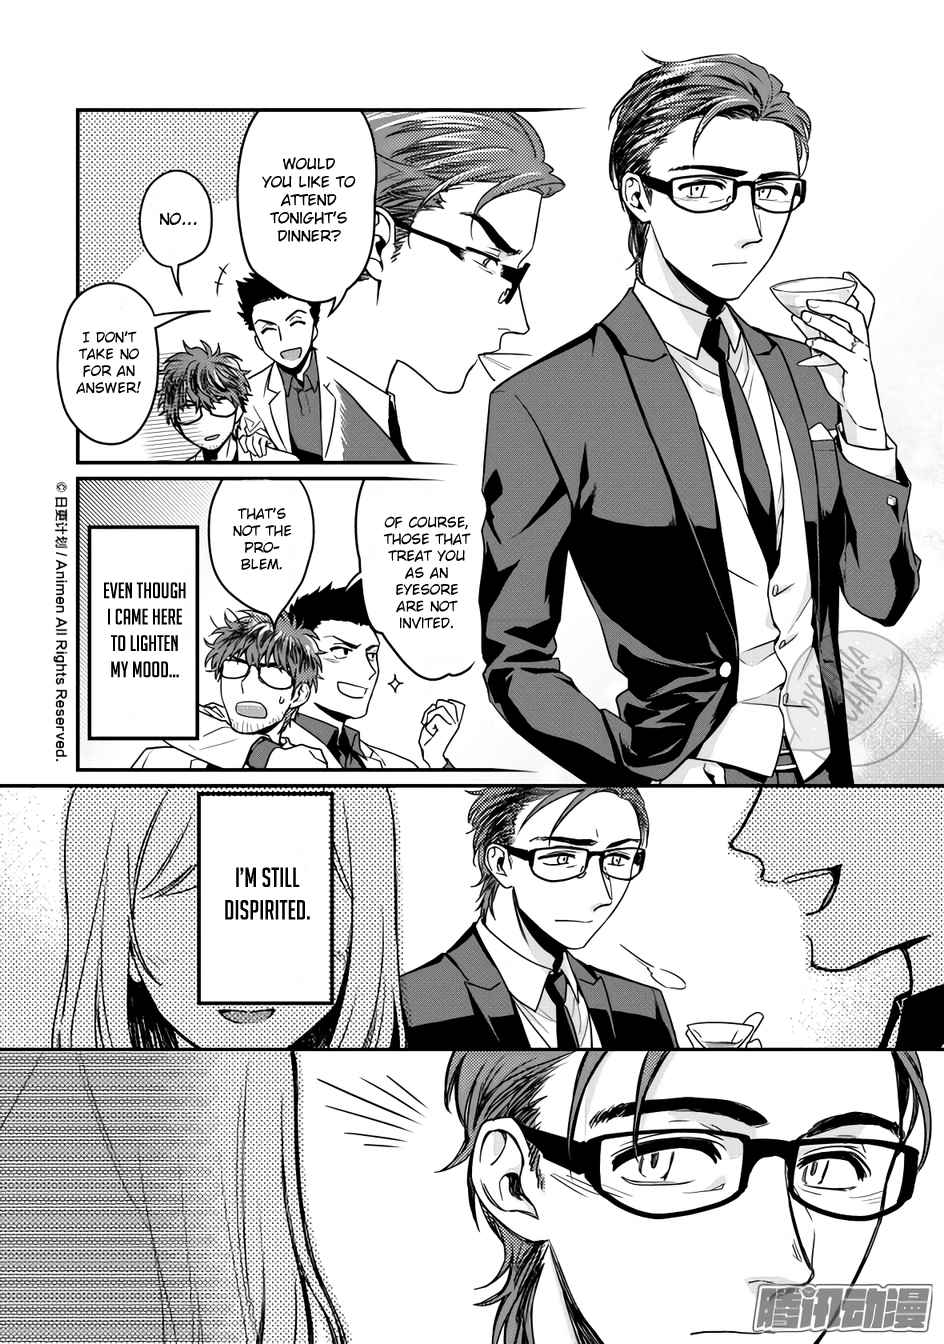 Magic Marriage Vol. 2 Ch. 10.2 His Wounds